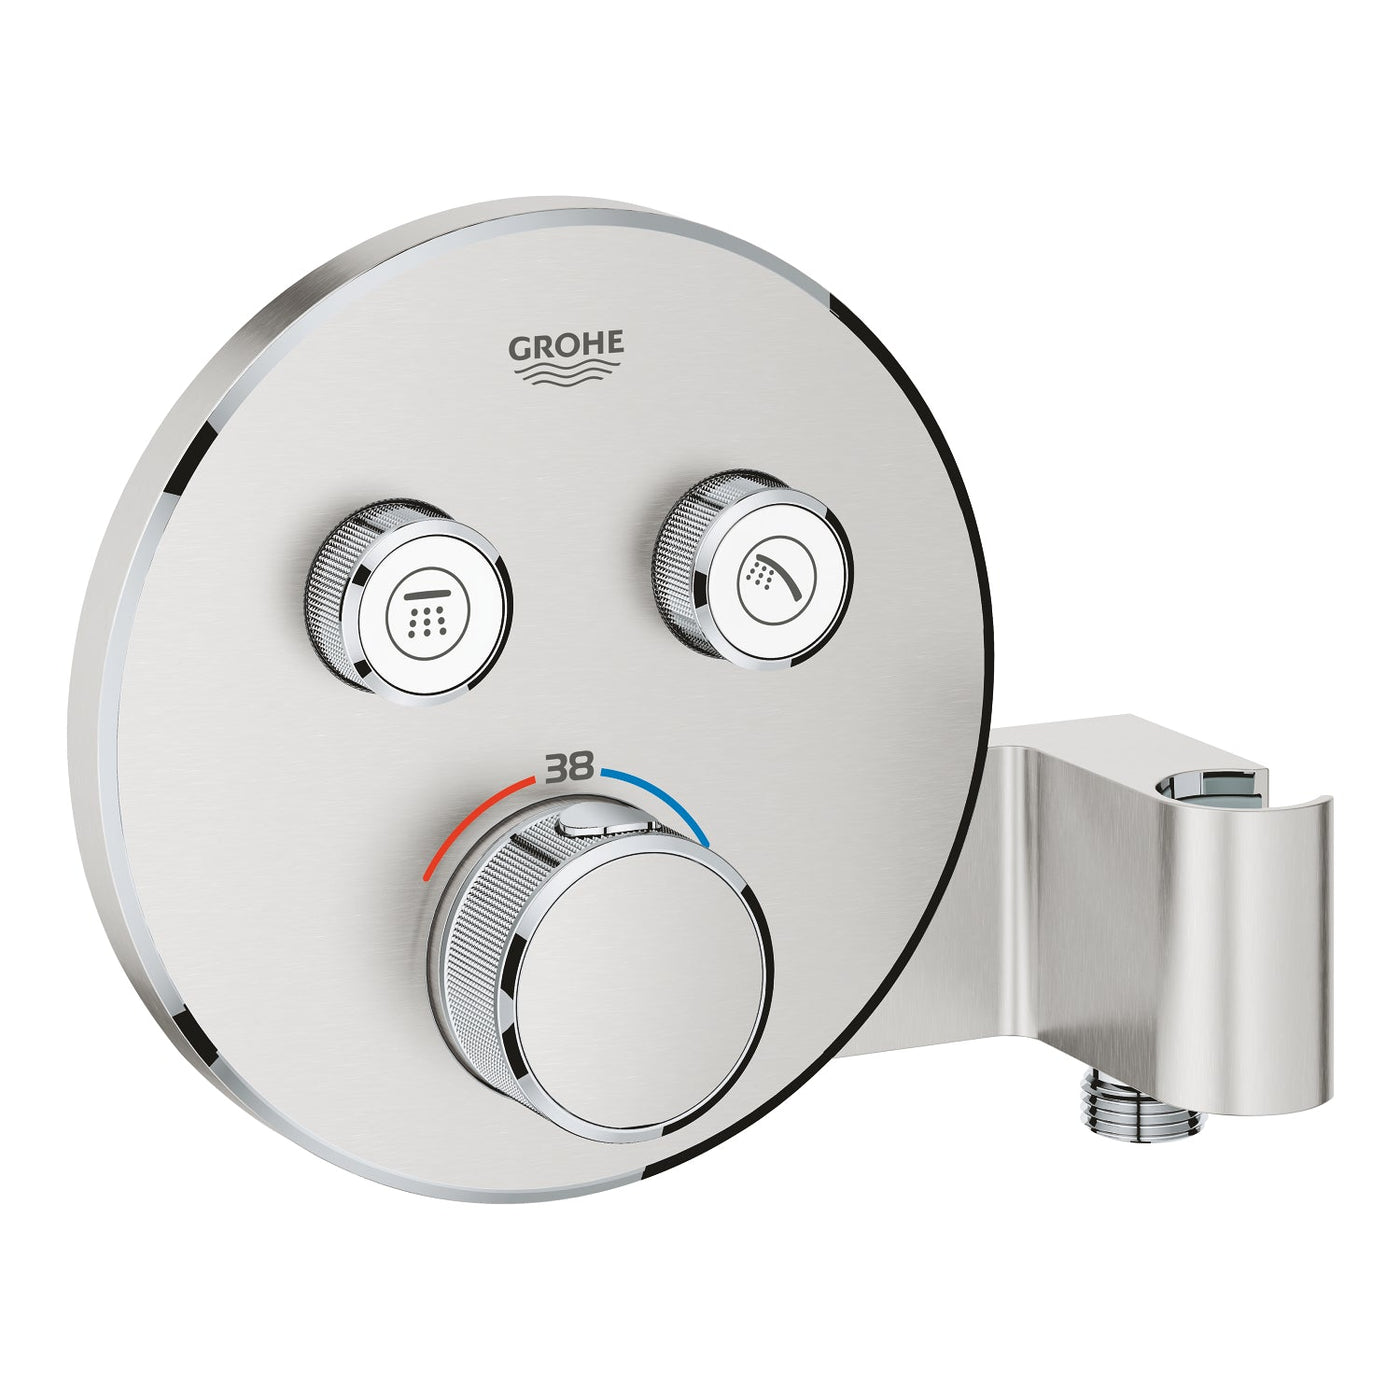 Grohe Supersteel Grohtherm SmartControl Thermostat for concealed installation with 
2 valves and integrated shower holder - Letta London - Push Button Shower Valves